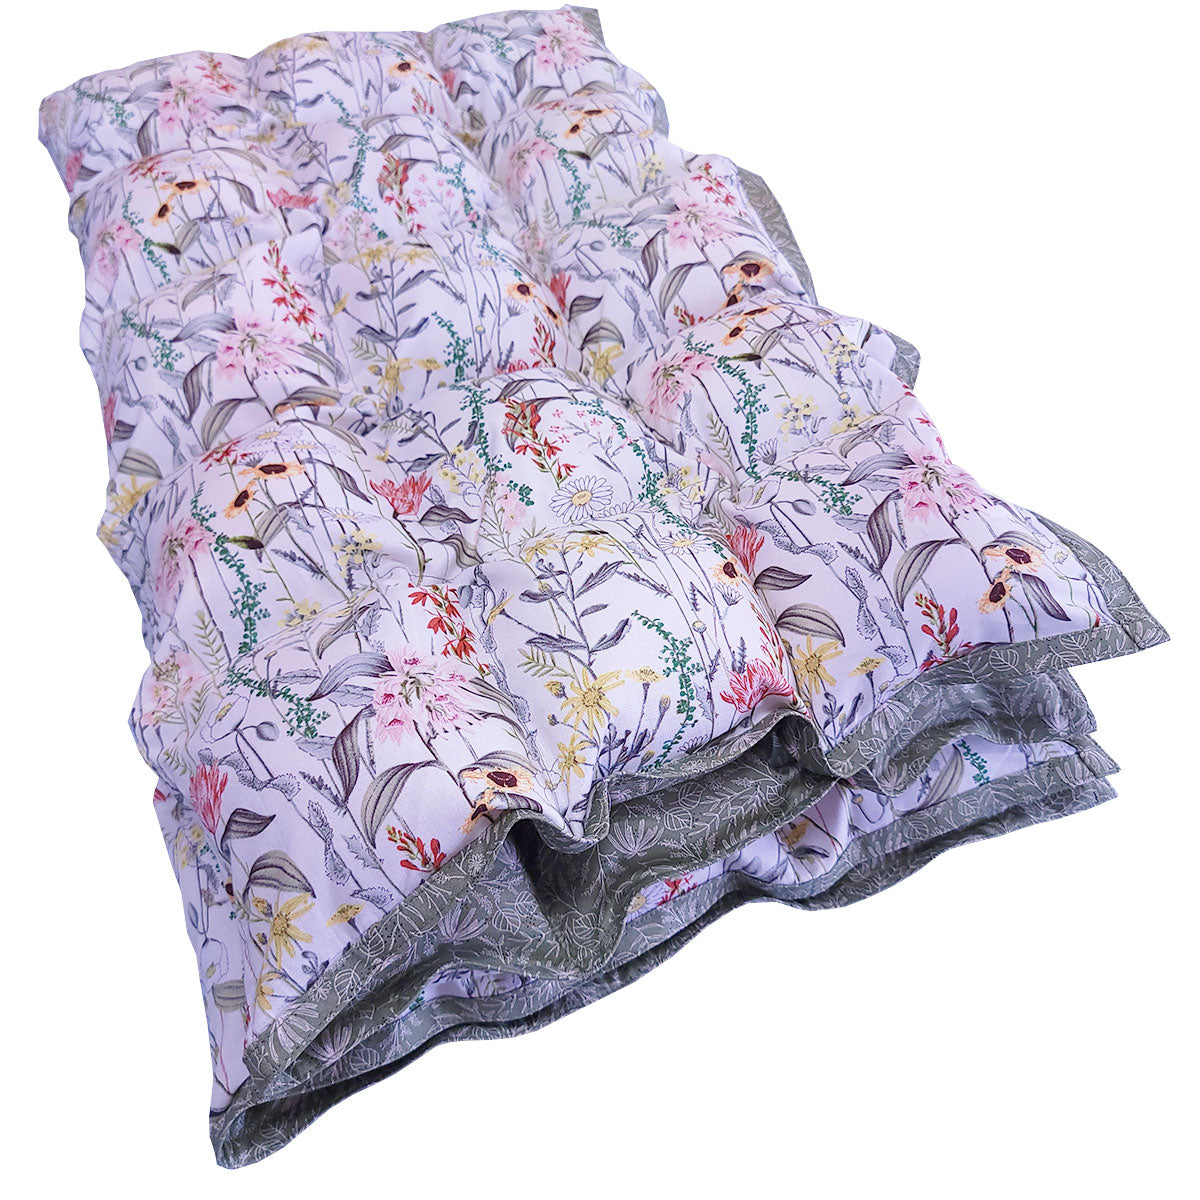 Clearance Weighted Blanket - Medium 12 lb Boho Wildflowers (for 100 lb user)